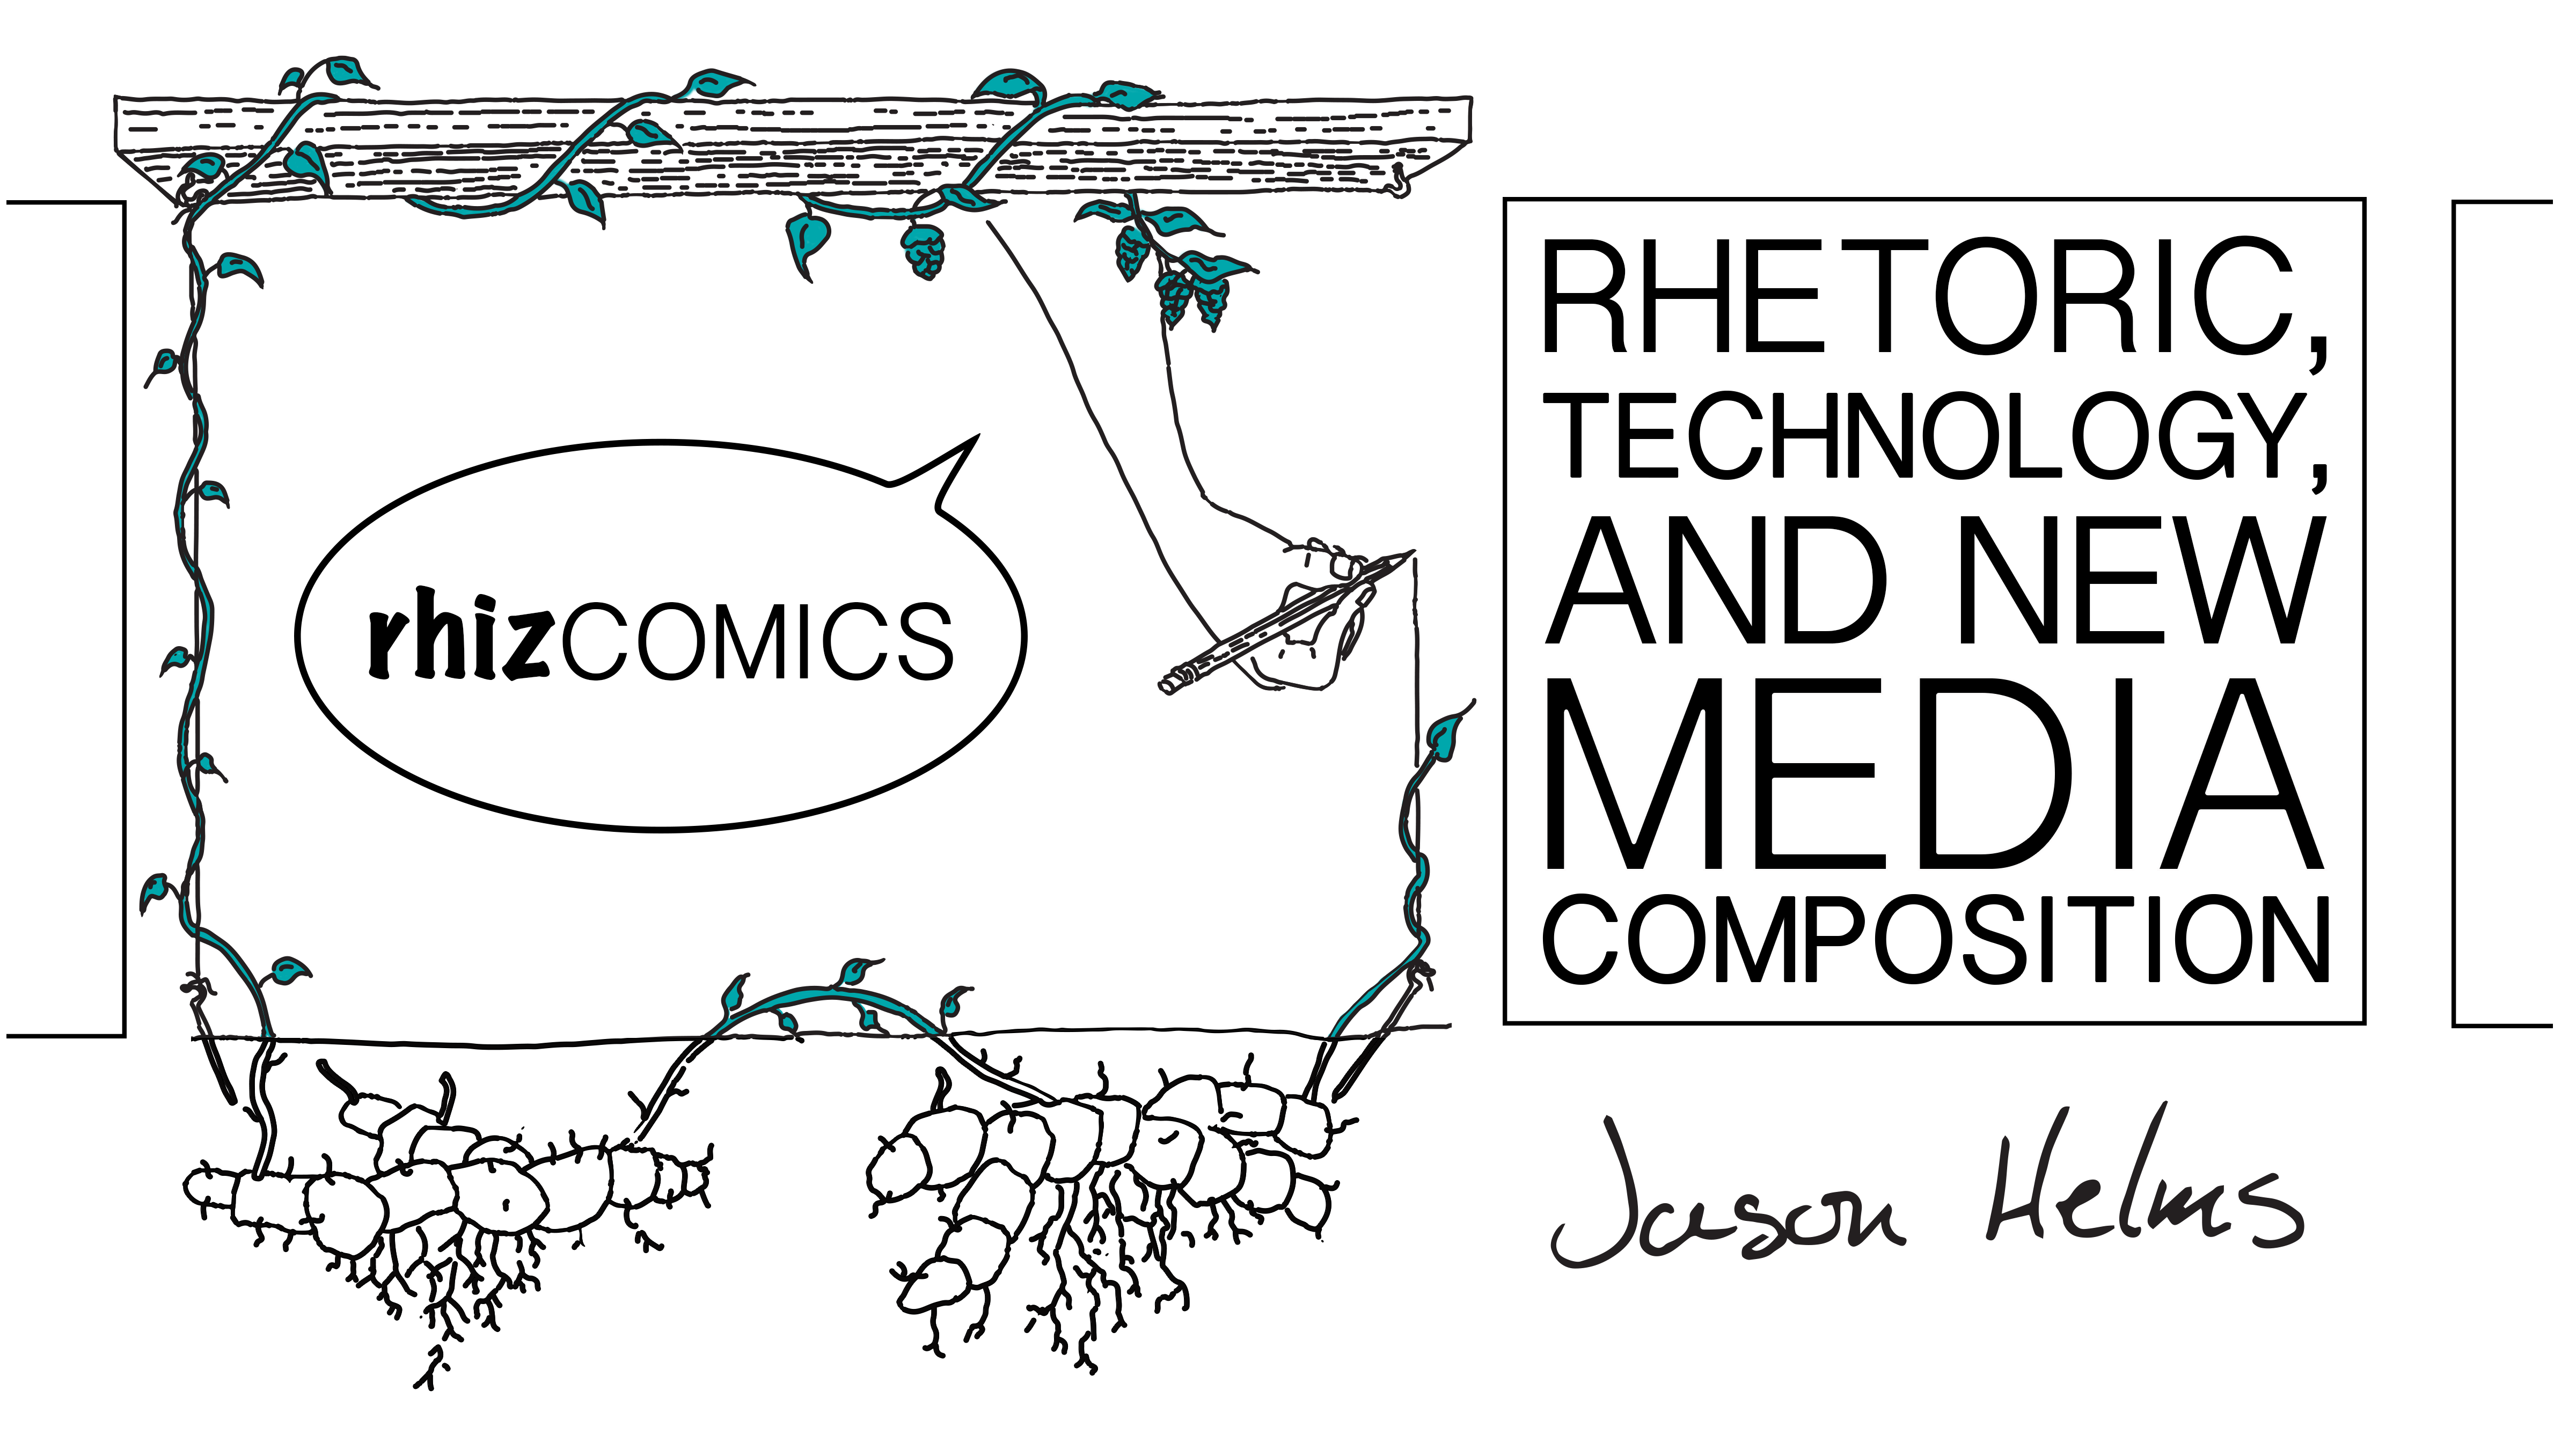 a hand-drawn trellis, vines, roots, and the author Jason Helms' name, and the typed title Rhizcomics: Rhetoric, Technology, and New Media Composition